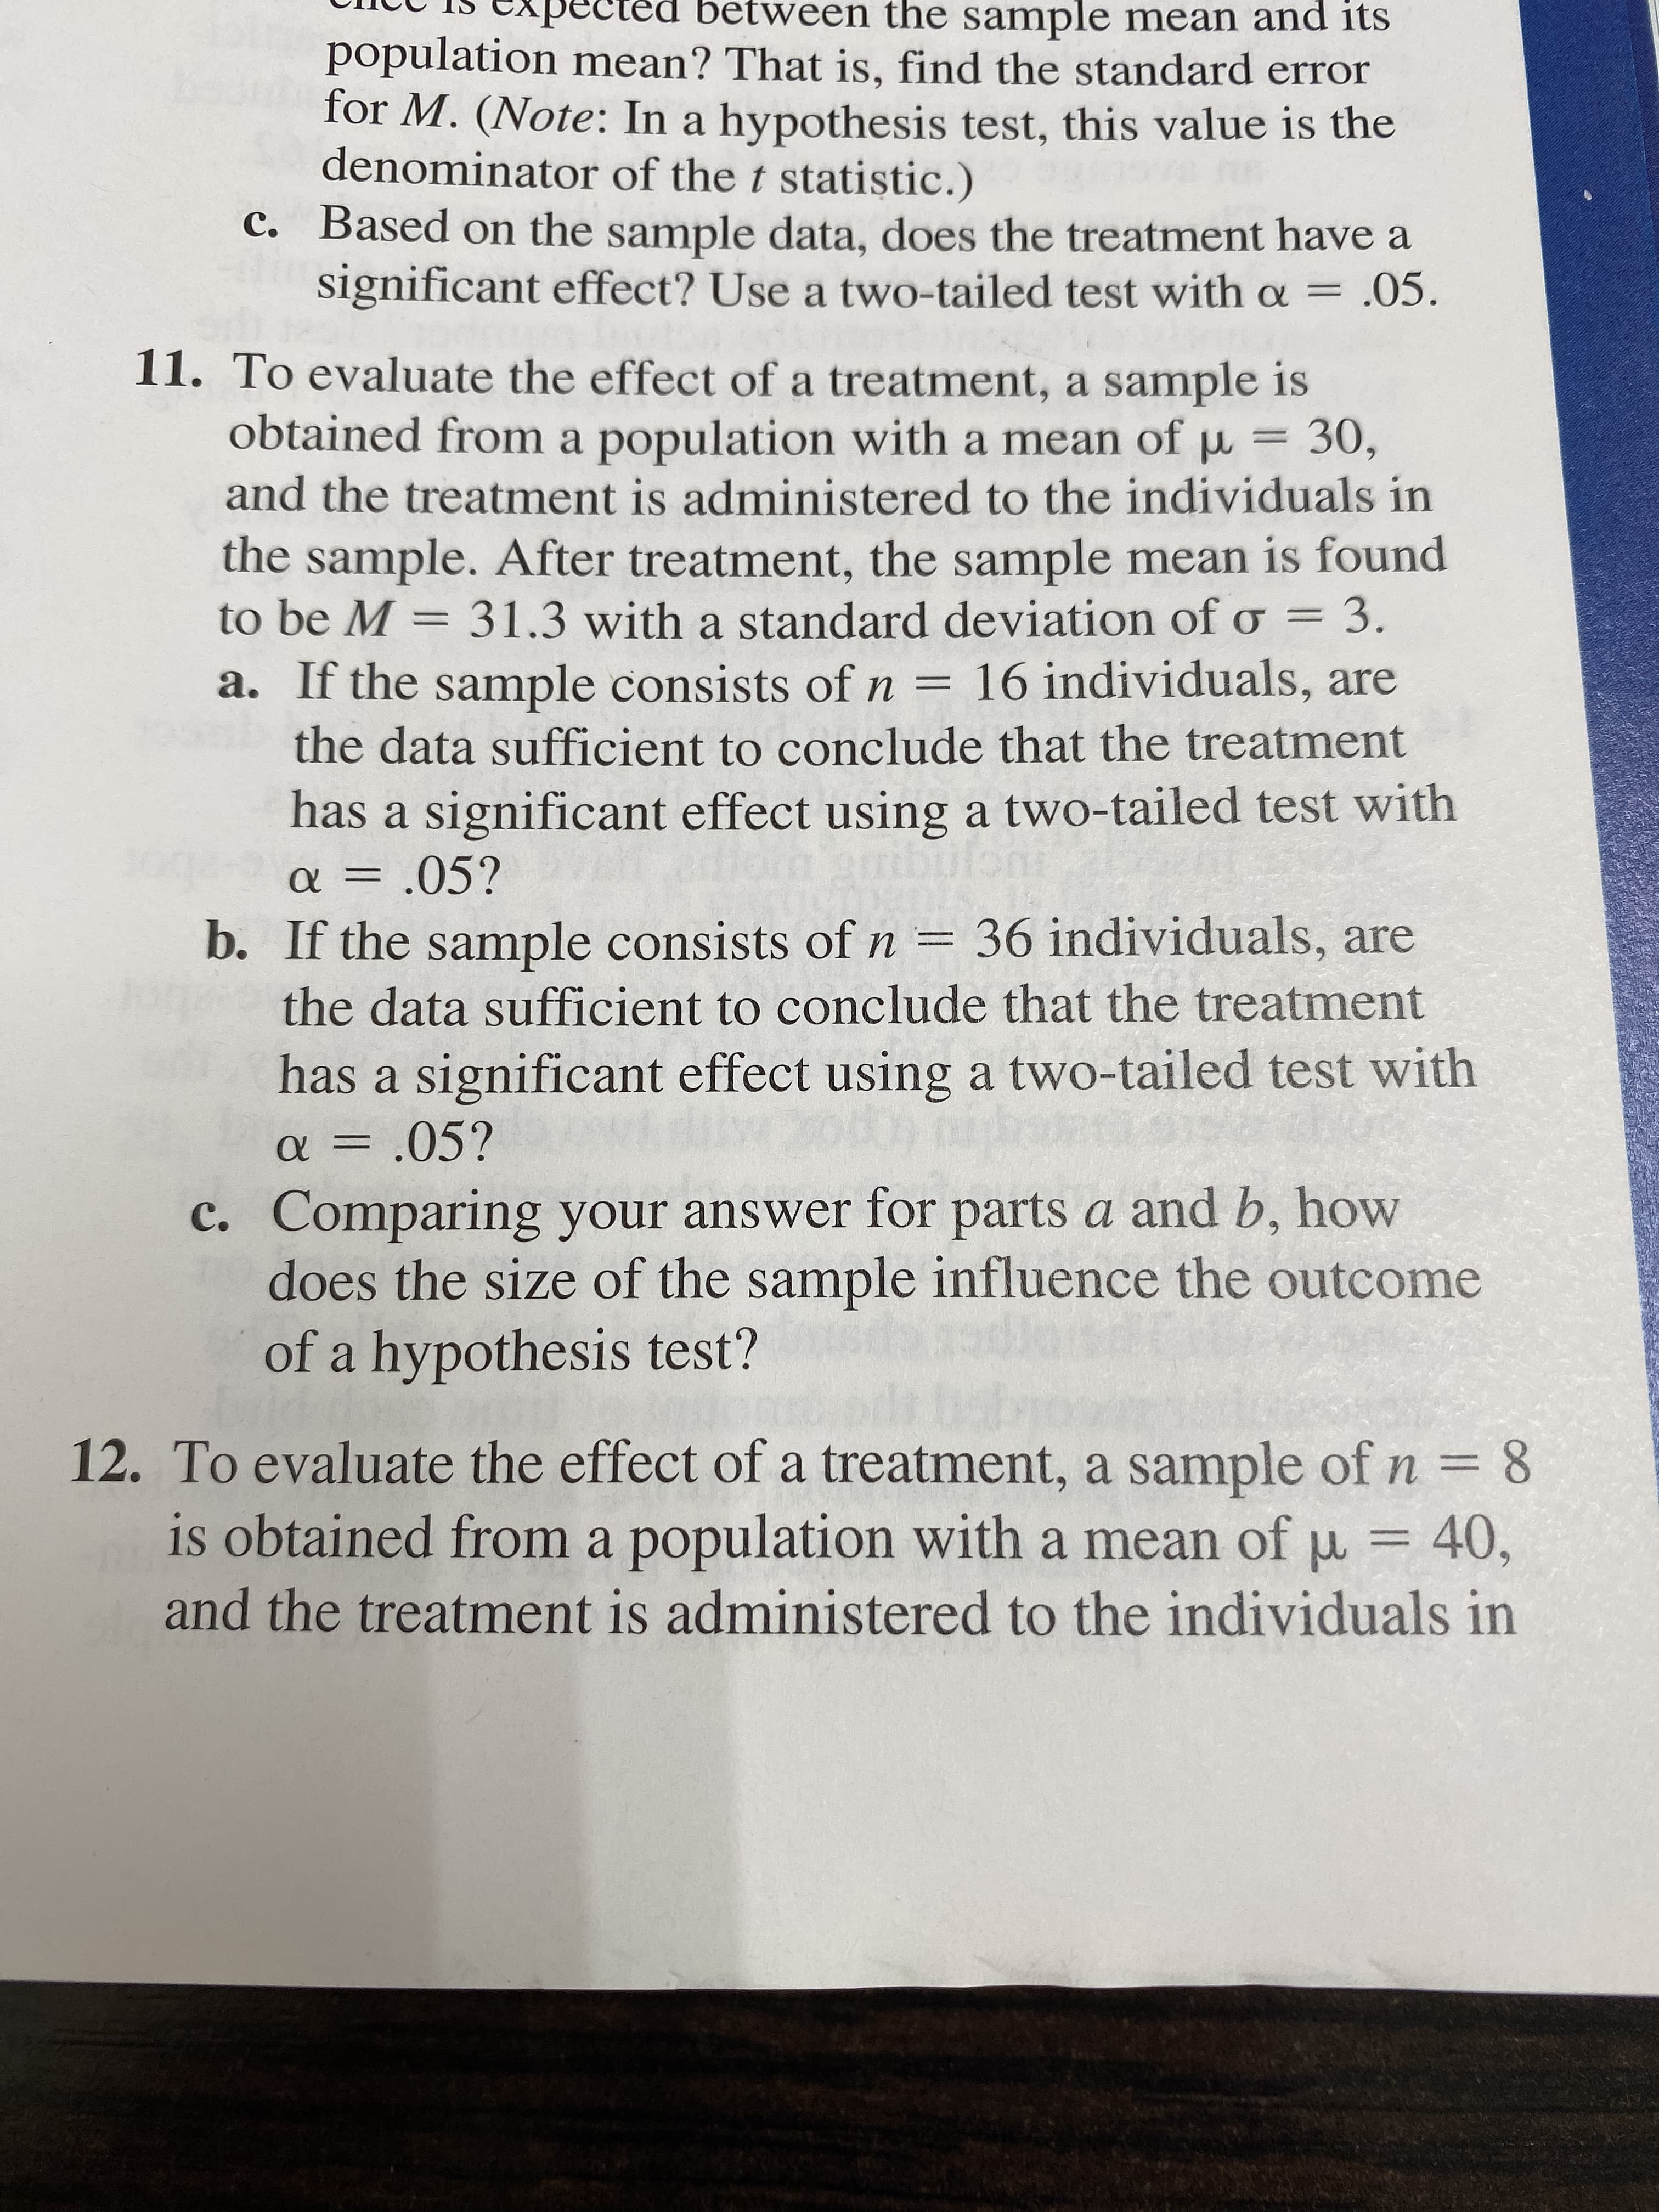 betw
en the sample mean and its
population mean? That is, find the standard error
for M. (Note: In a hypothesis test, this value is the
denominator of the t statistic.)
C. Based on the sample data, does the treatment have a
significant effect? Use a two-tailed test with o = .05.
11. To evaluate the effect of a treatment, a sample is
obtained from a population with a mean of
and the treatment is administered to the individuals in
30,
the sample. After treatment, the sample mean is found
to be M 31.3 with a standard deviation of o 3.
a. If the sample consists of n 16 individuals, are
the data sufficient to conclude that the treatment
has a significant effect using a two-tailed test with
.05?
36 individuals, are
b. If the sample consists of n
the data sufficient to conclude that the treatment
has a significant effect using a two-tailed test with
05?
c. Comparing your answer for parts a and b, how
does the size of the sample influence the outcome
of a hypothesis test?
12. To evaluate the effect of a treatment, a sample of n 8
is obtained from a population with a mean of
and the treatment is administered to the individuals in
40,
